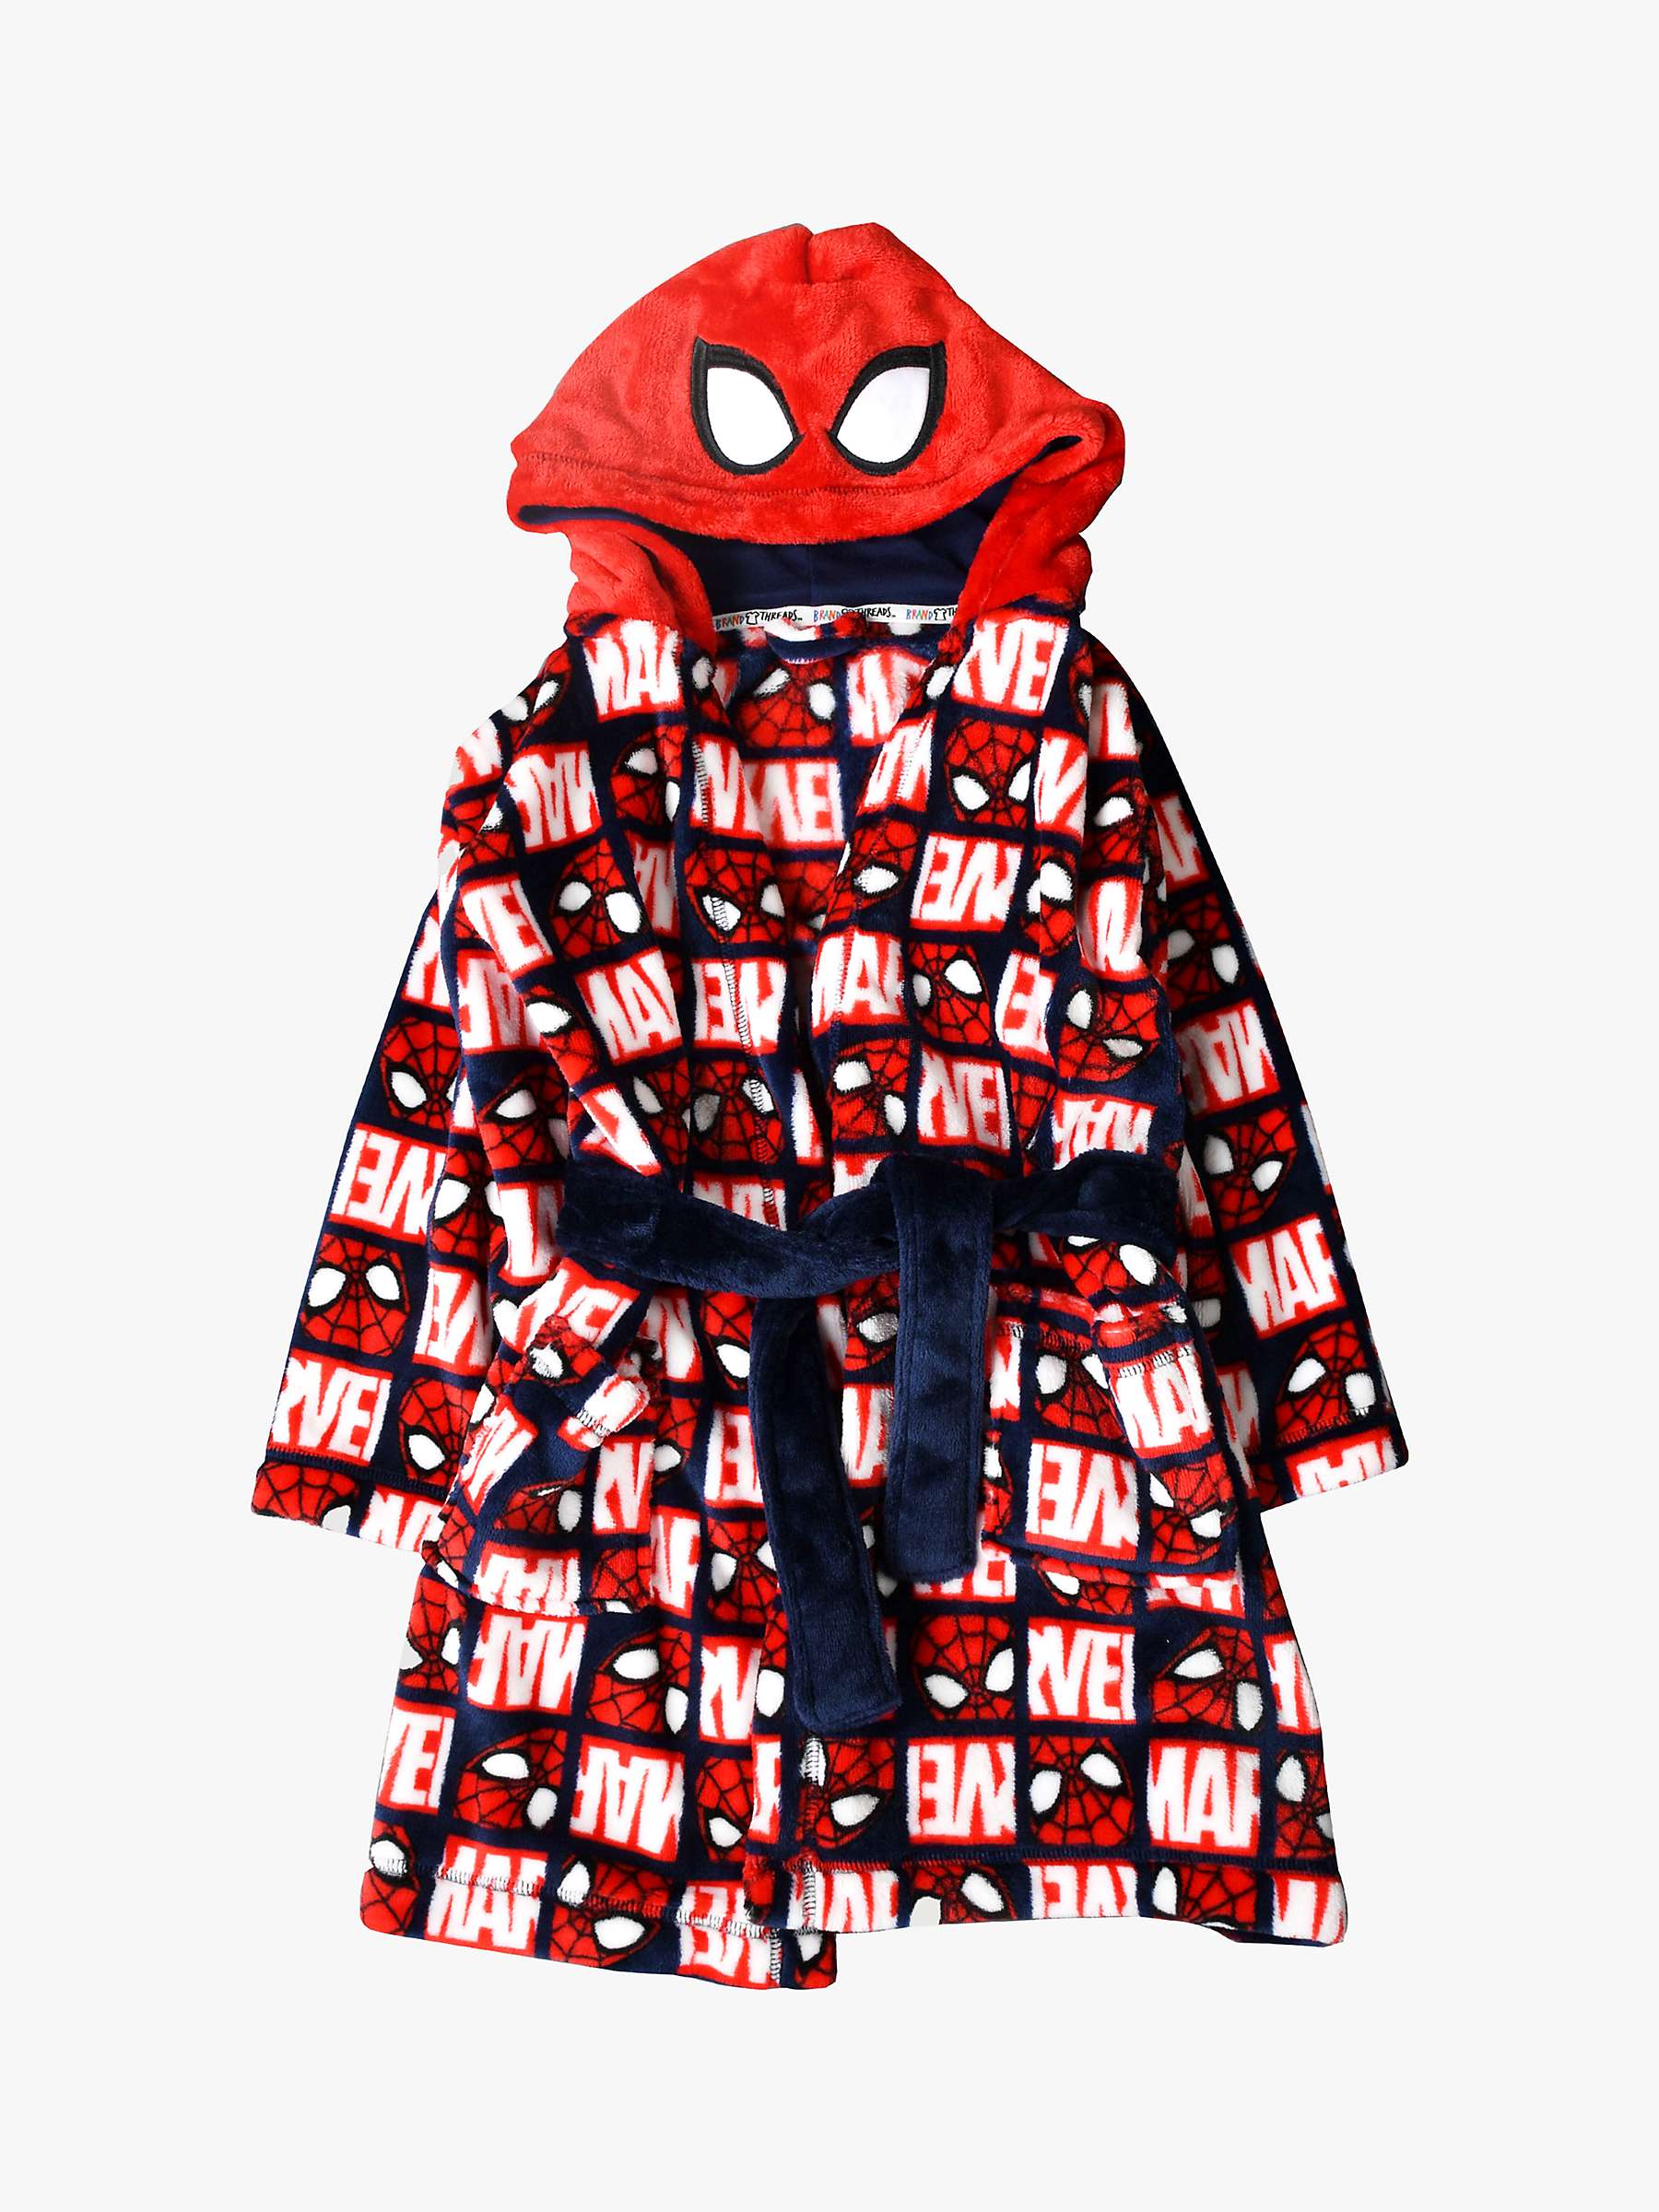 Buy Brand Threads Kids' Spiderman Dressing Gown, Red/Multi Online at johnlewis.com